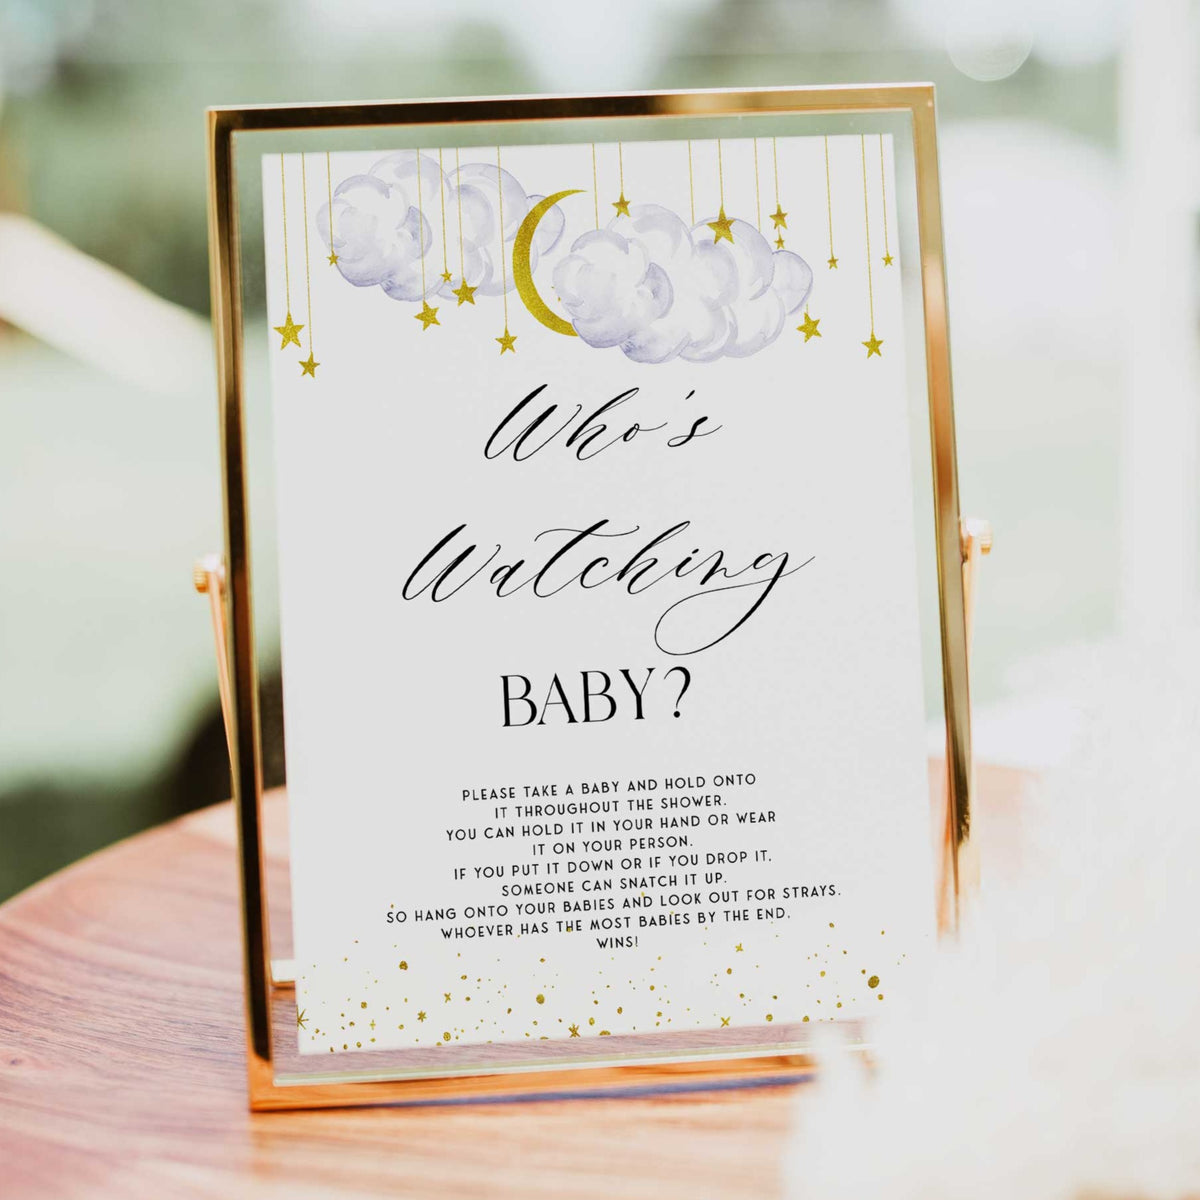 Fully editable and printable baby shower who's watching baby game with a little star design. Perfect for a Twinkle Little Star baby shower themed party